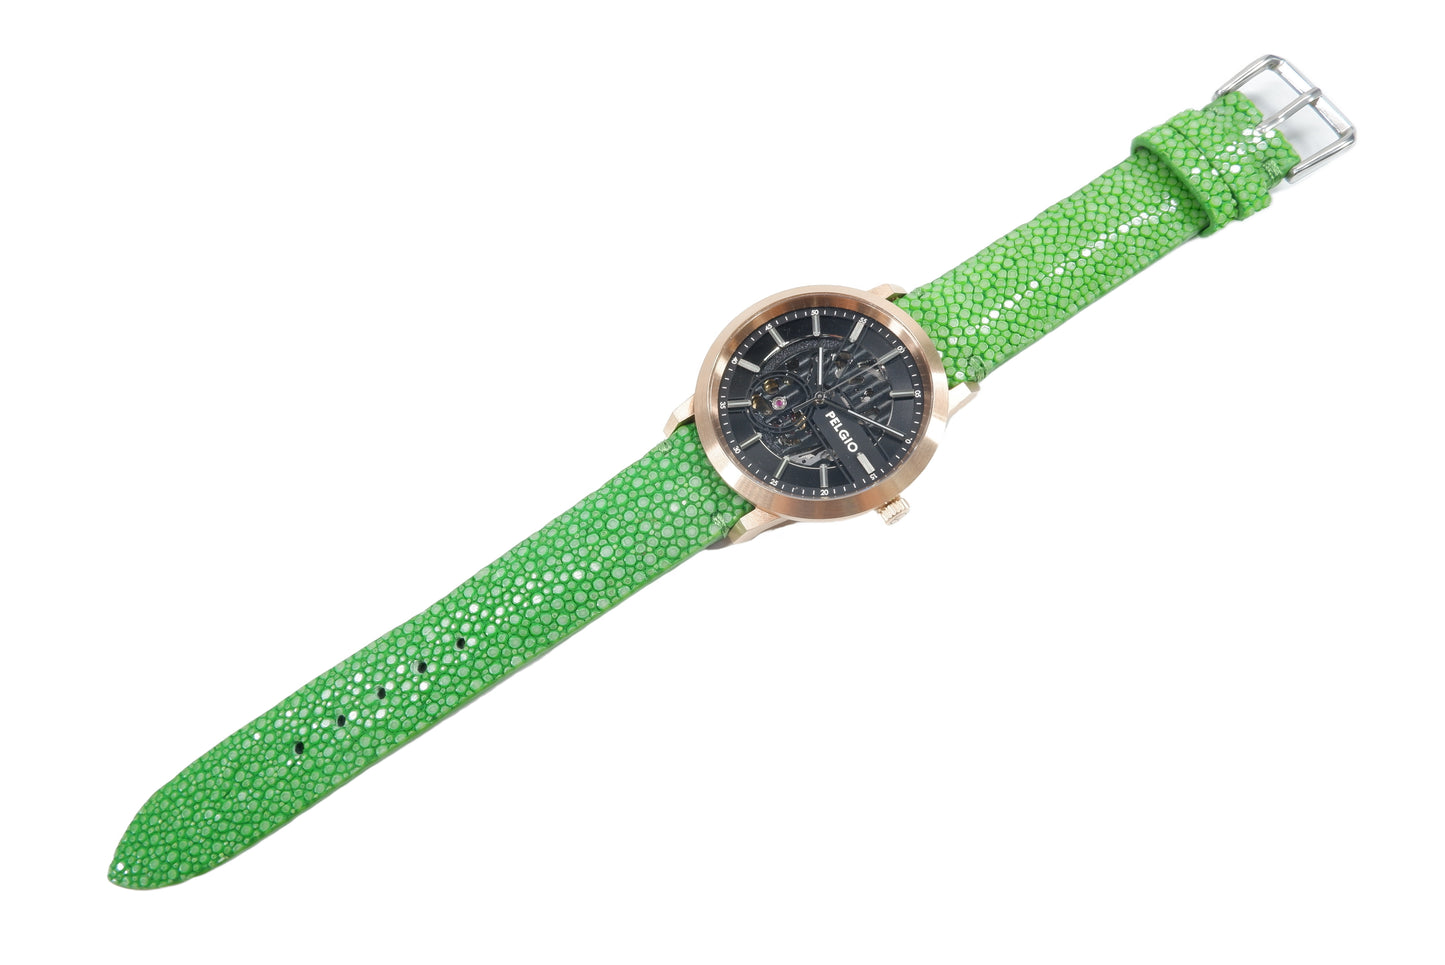 Genuine Polished Stingray Skin Leather Quick Release Watch Strap Green Band with Buckle